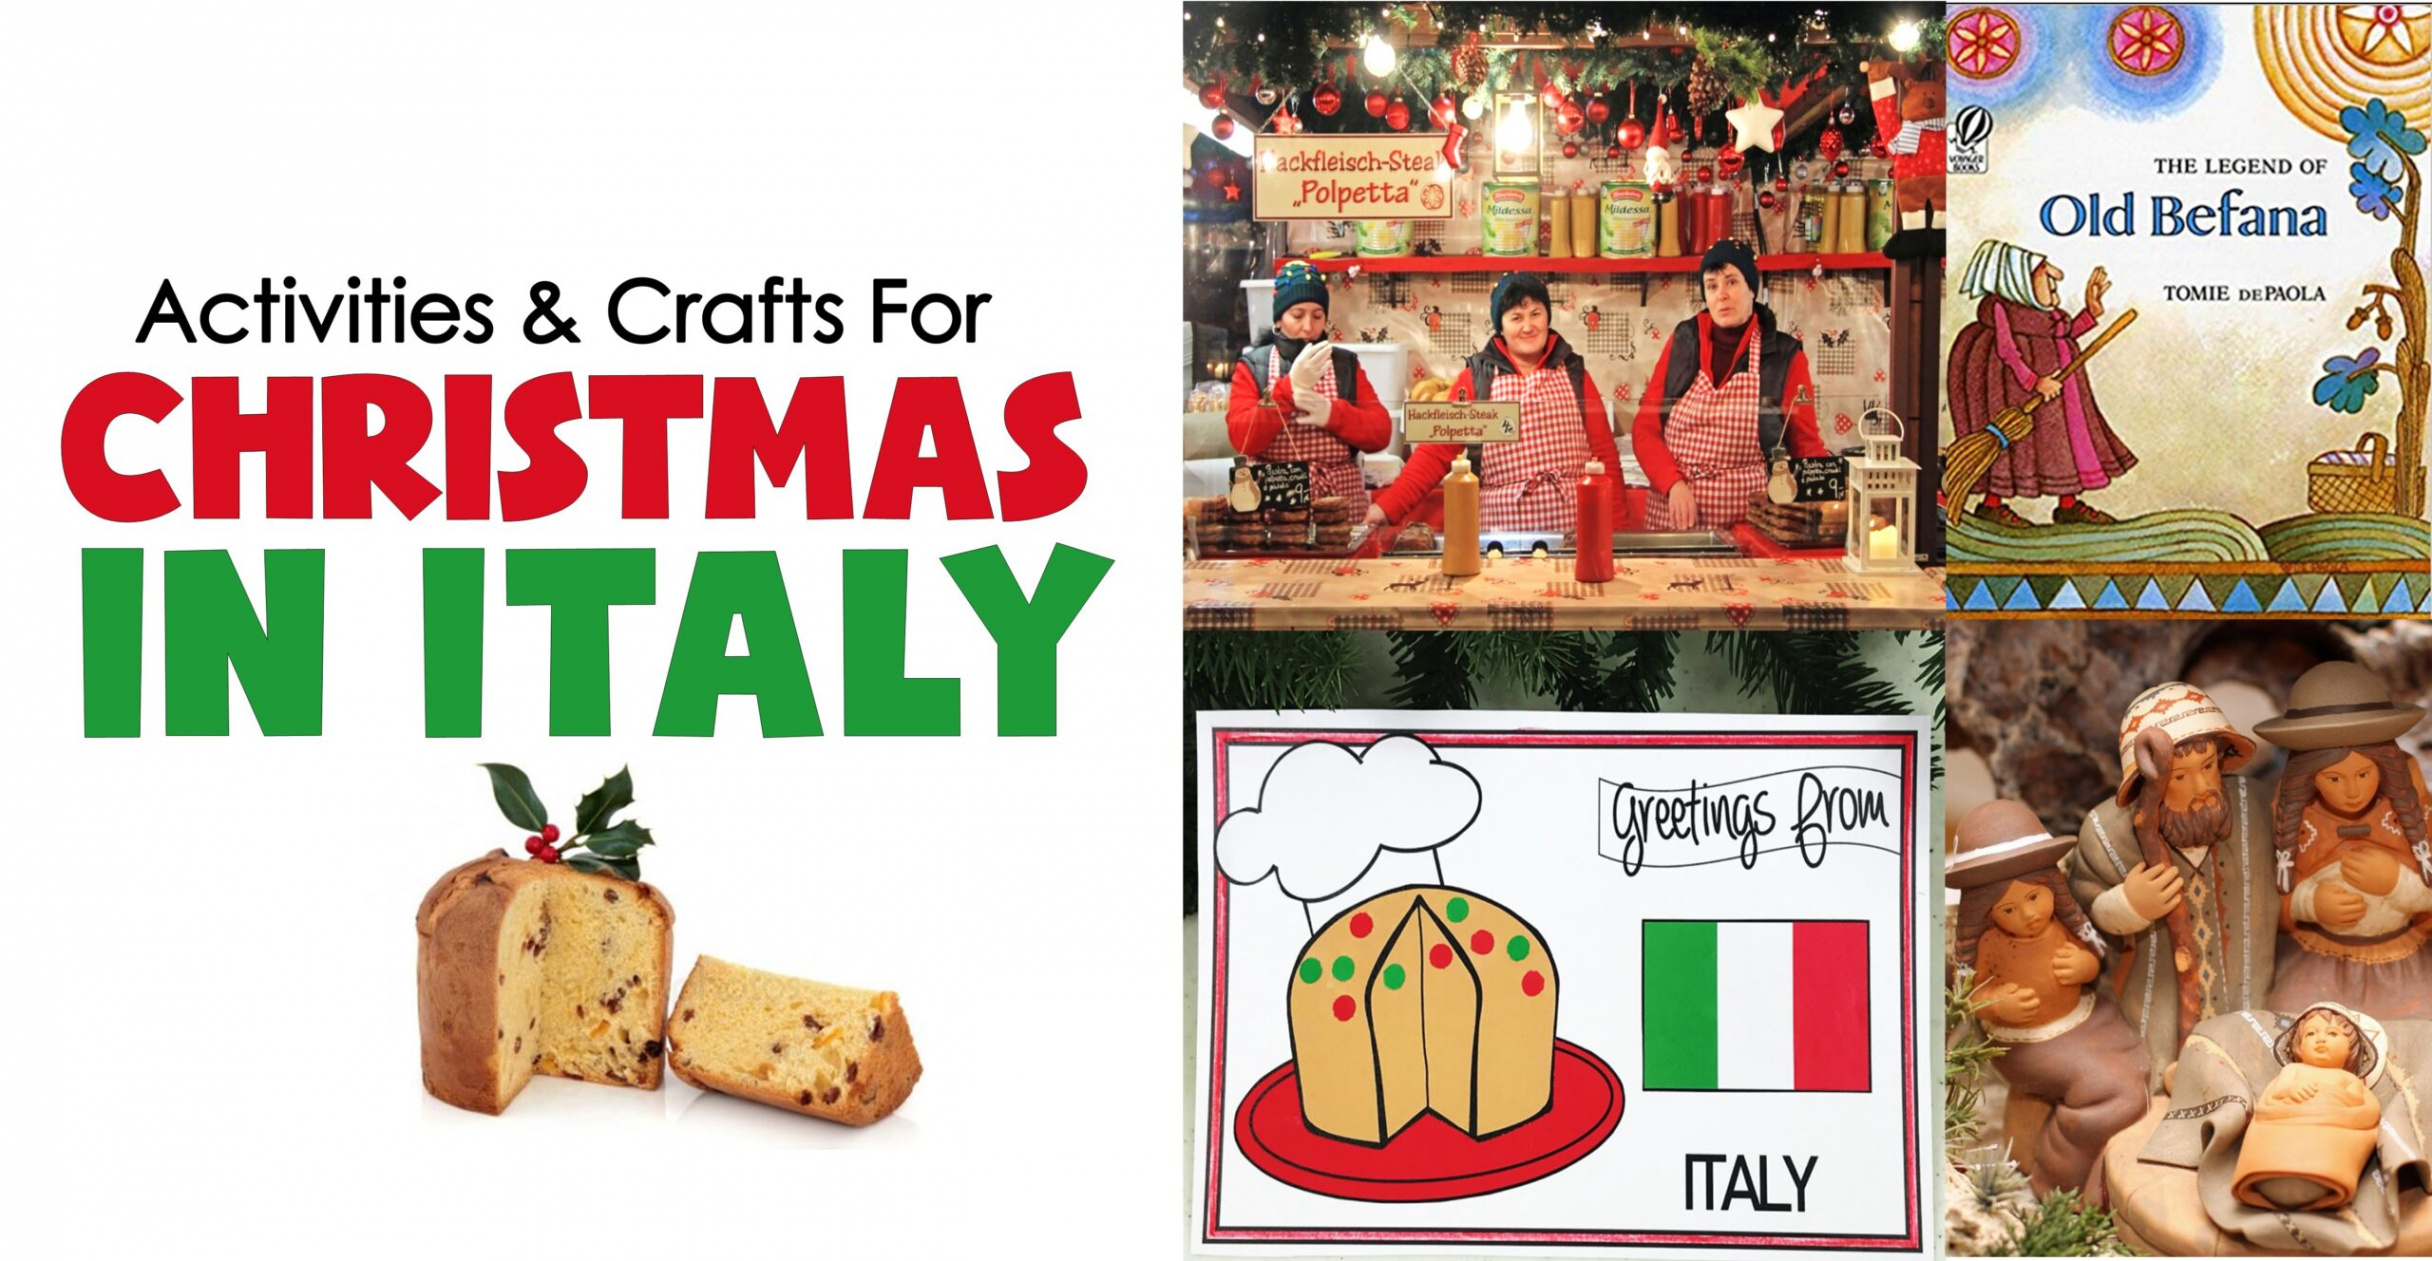 Christmas Traditions in Italy: Activities & Crafts for Kids